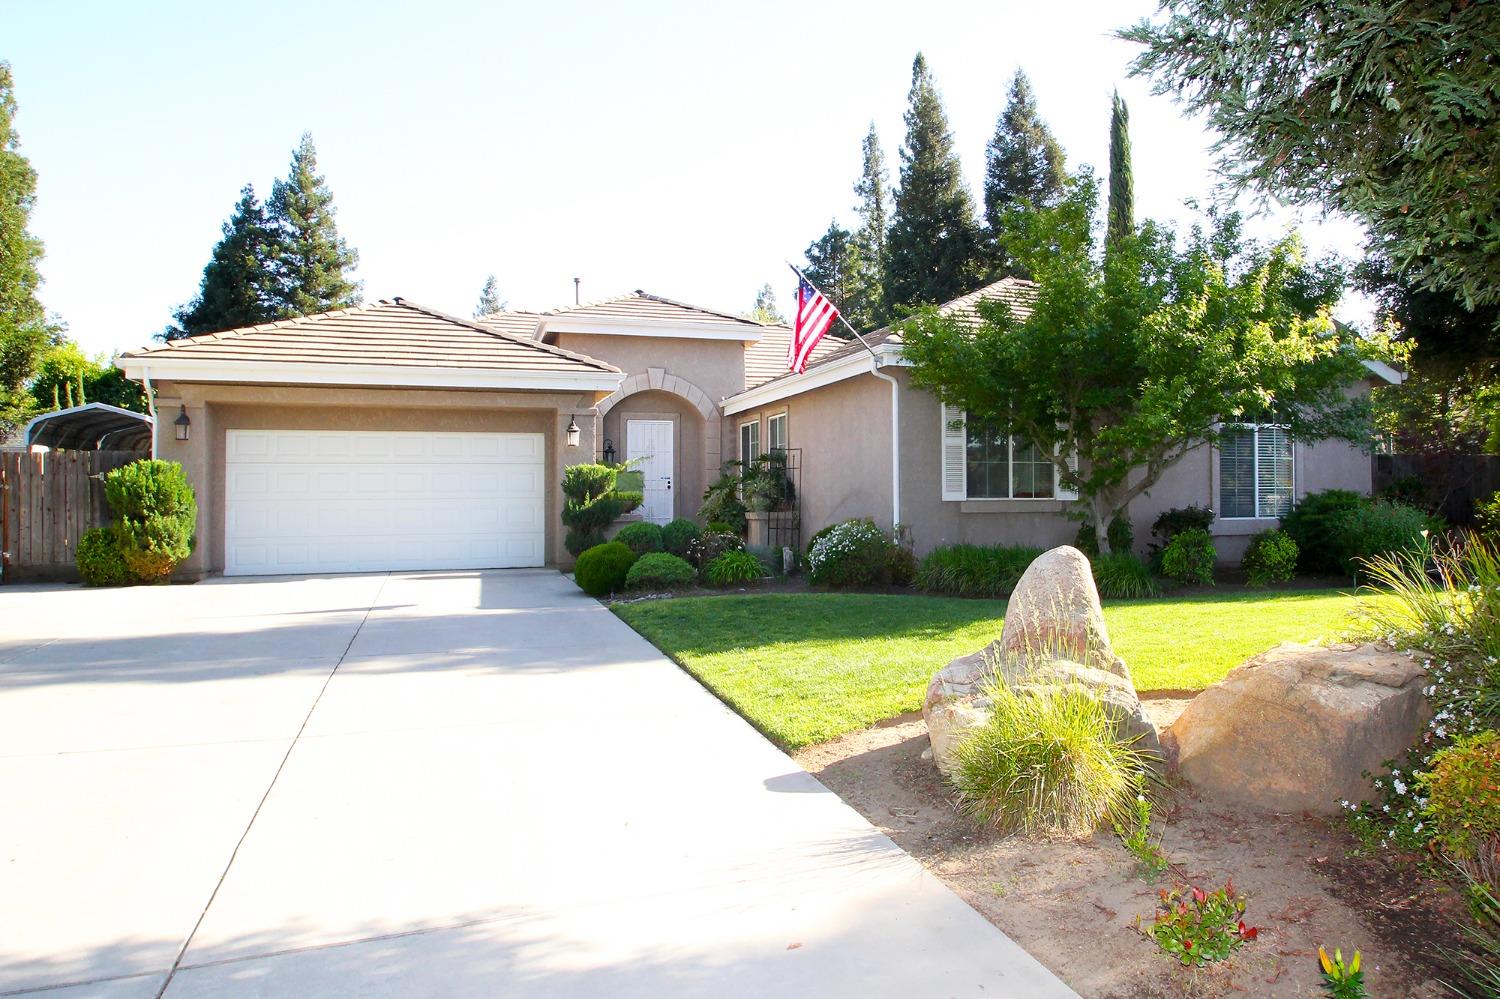 Photo of 2418 Rall Ave in Clovis, CA